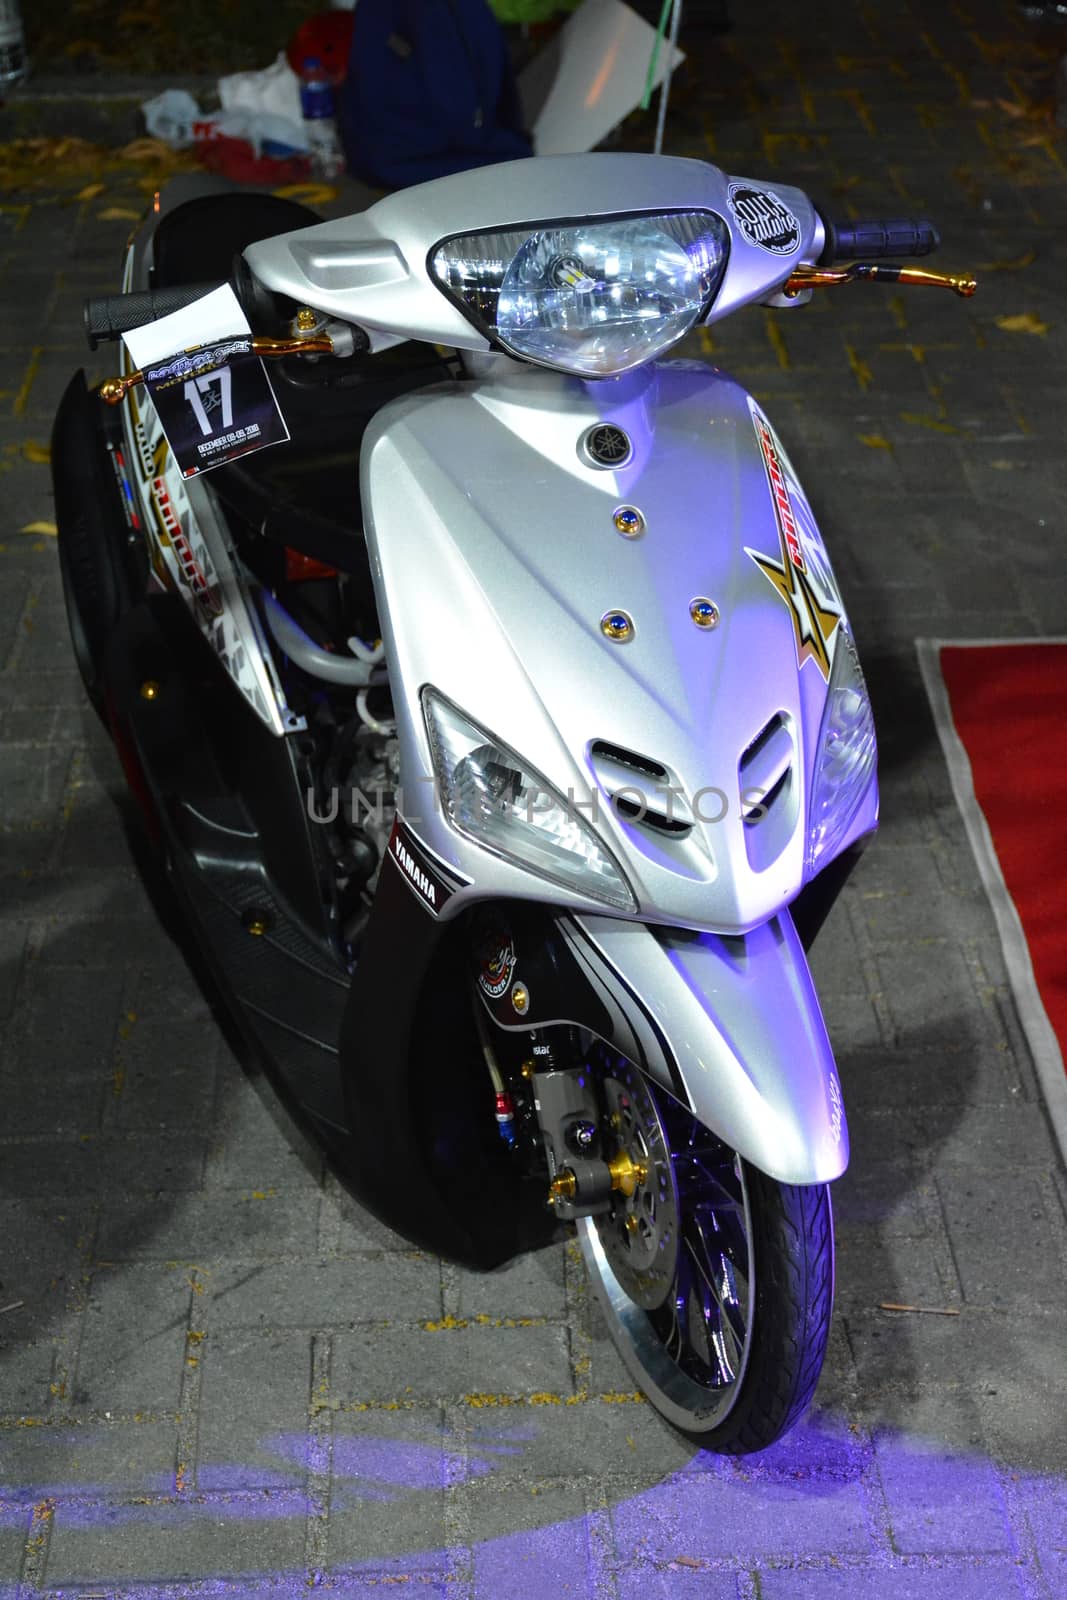 Yamaha motorcycle at Bumper to Bumper car show in Pasay, Philipp by imwaltersy